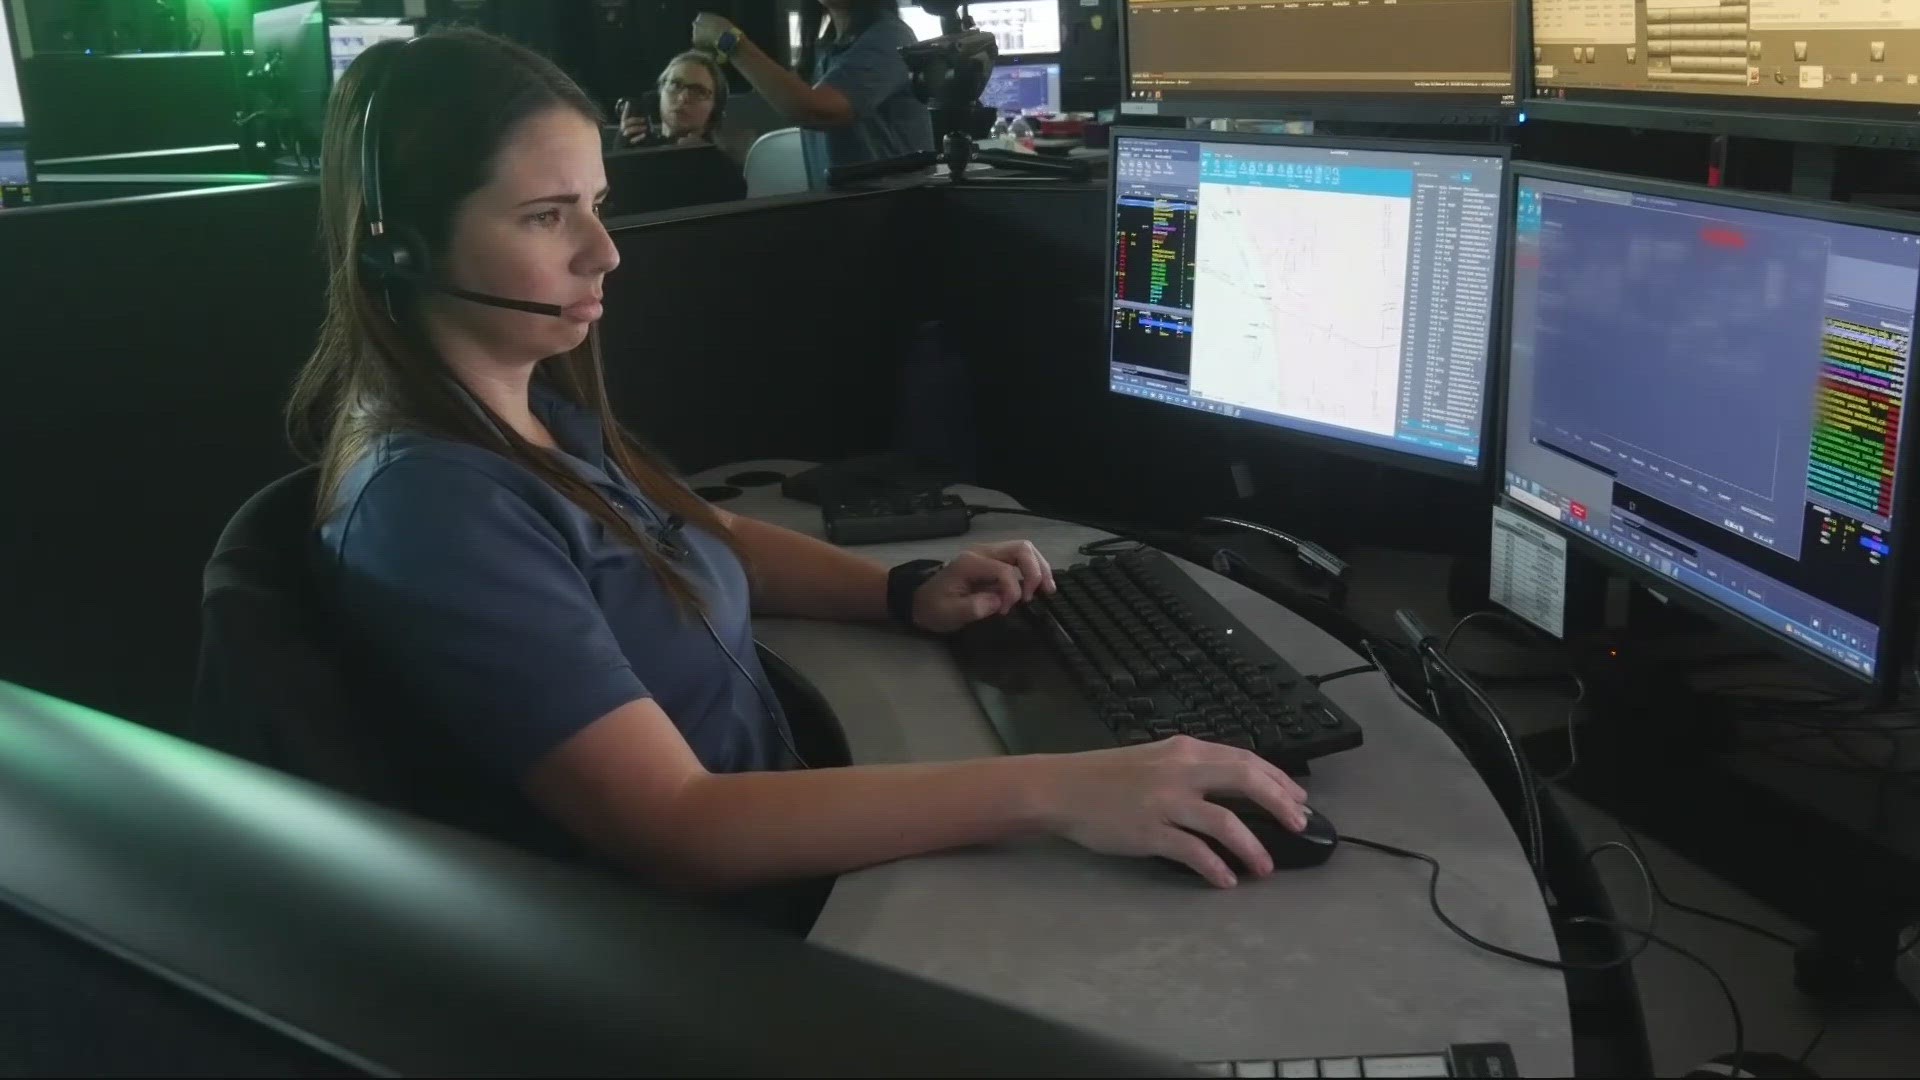 From April 9 to 15, dispatchers across the country are honored for National Public Safety Telecommunicators Week.